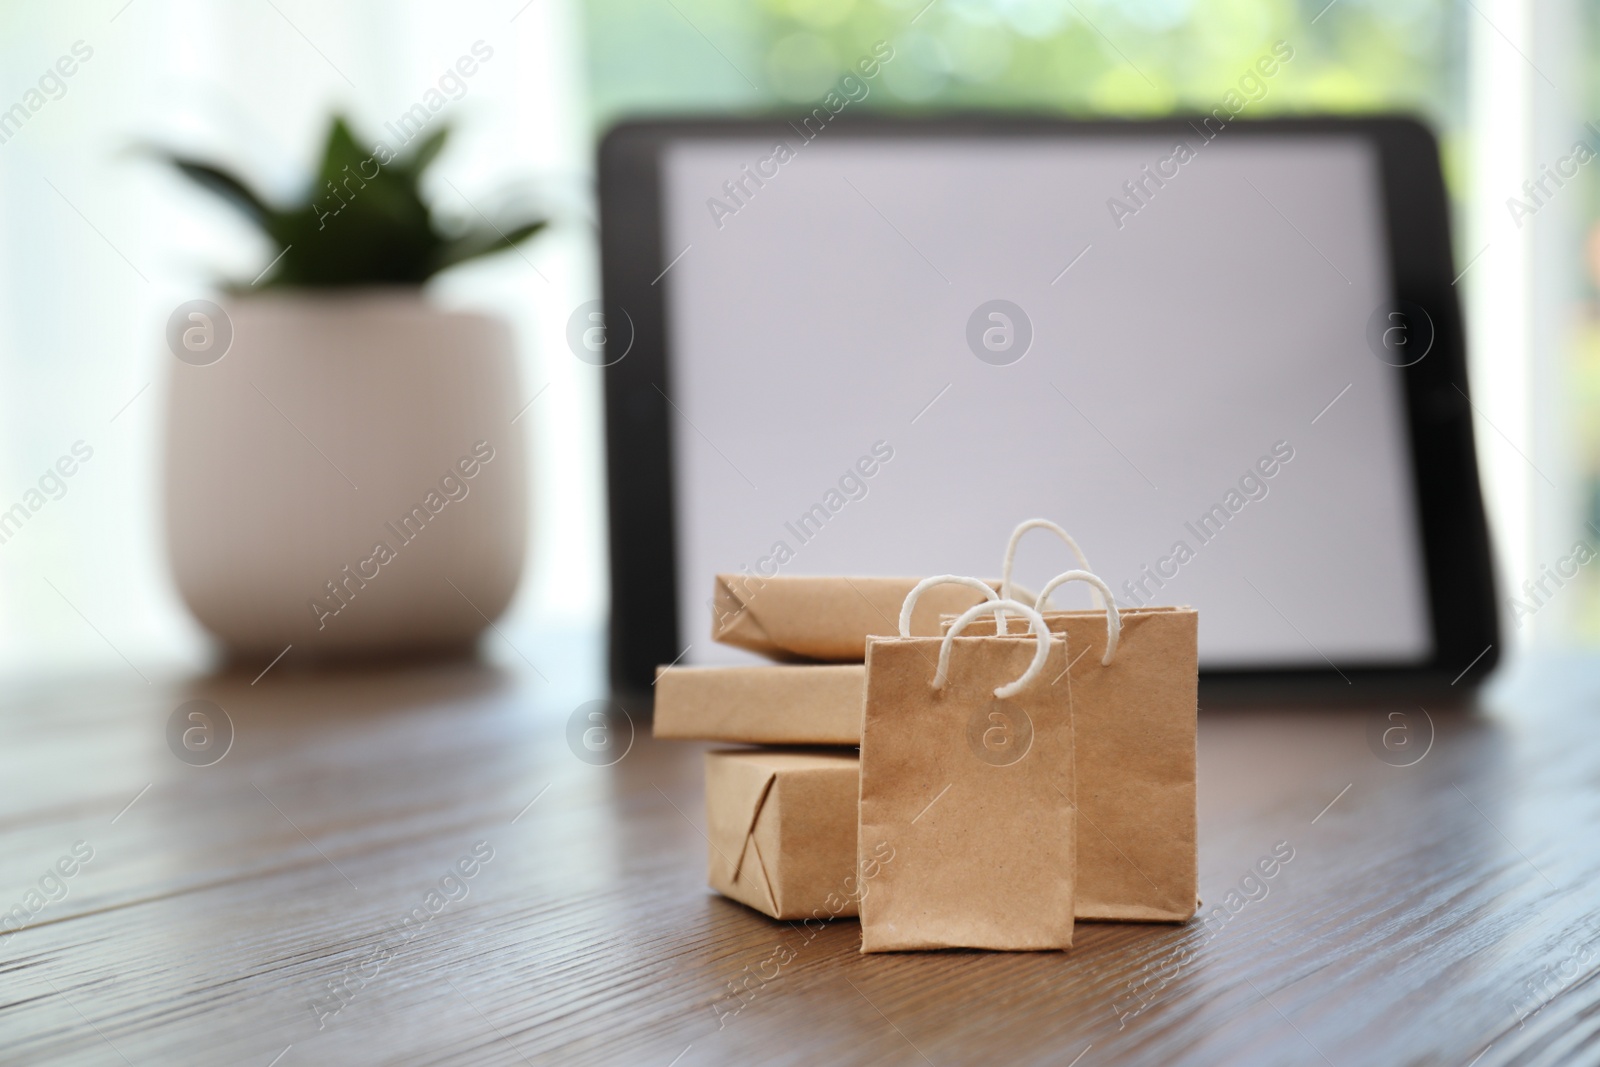 Photo of Internet shopping. Small bags and boxes near modern tablet on table indoors, space for text